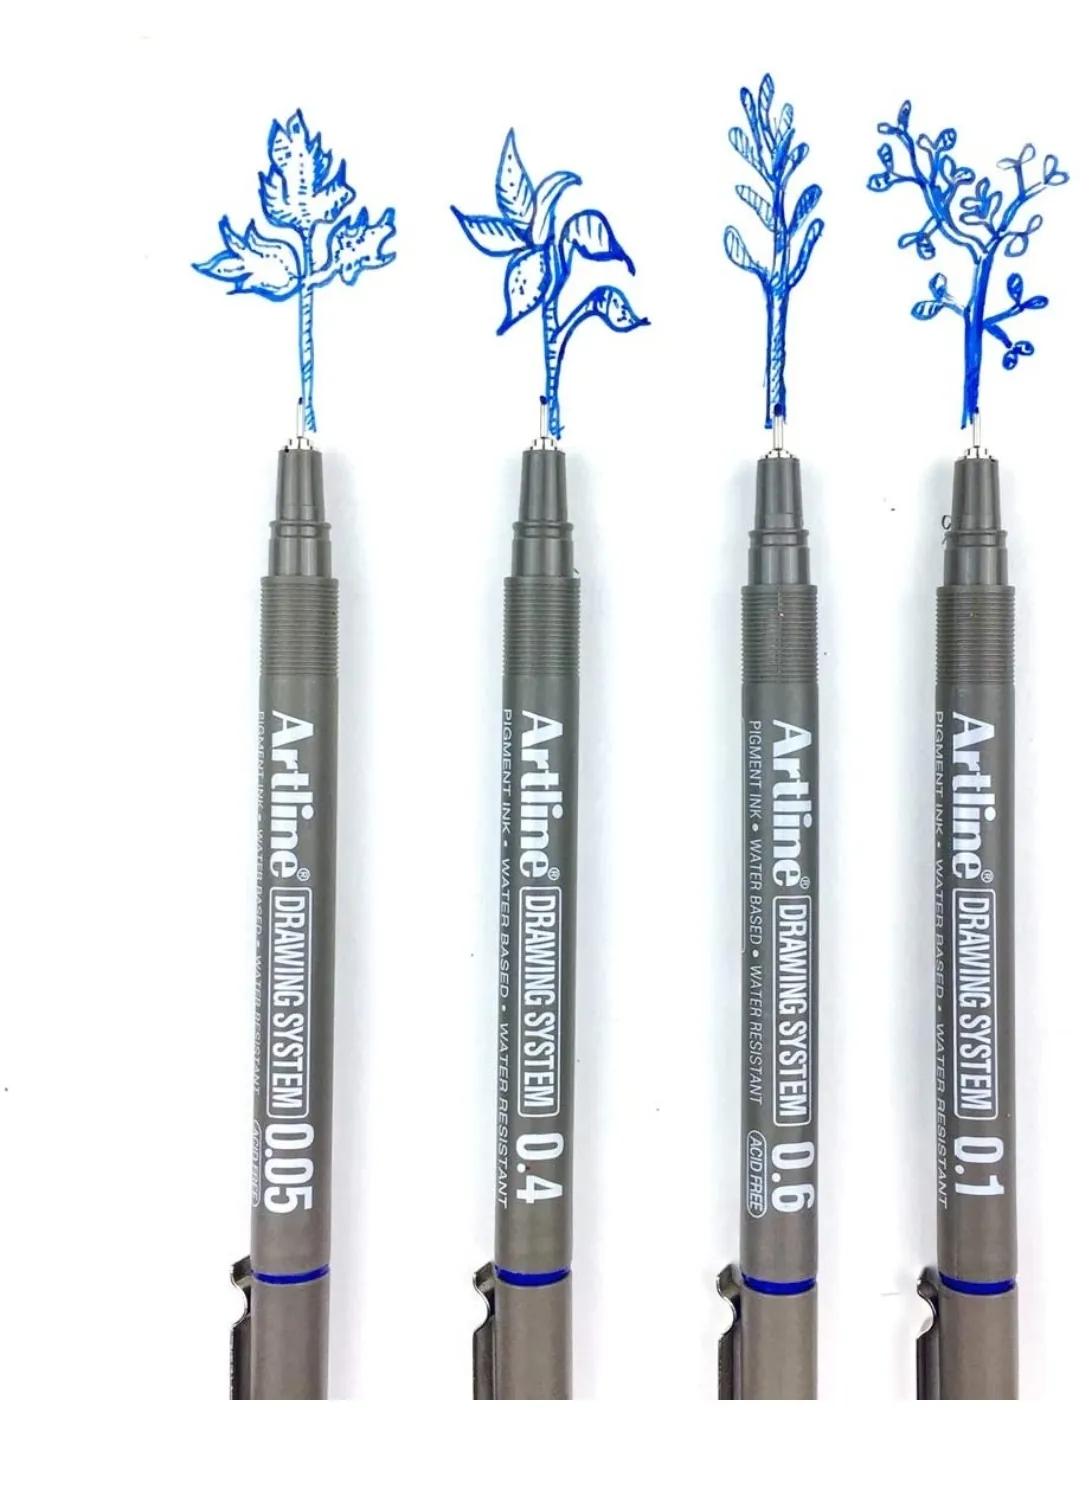 Artline Drawing System Artistic Technical Pen 0.4 mm Point Size Pack of 1